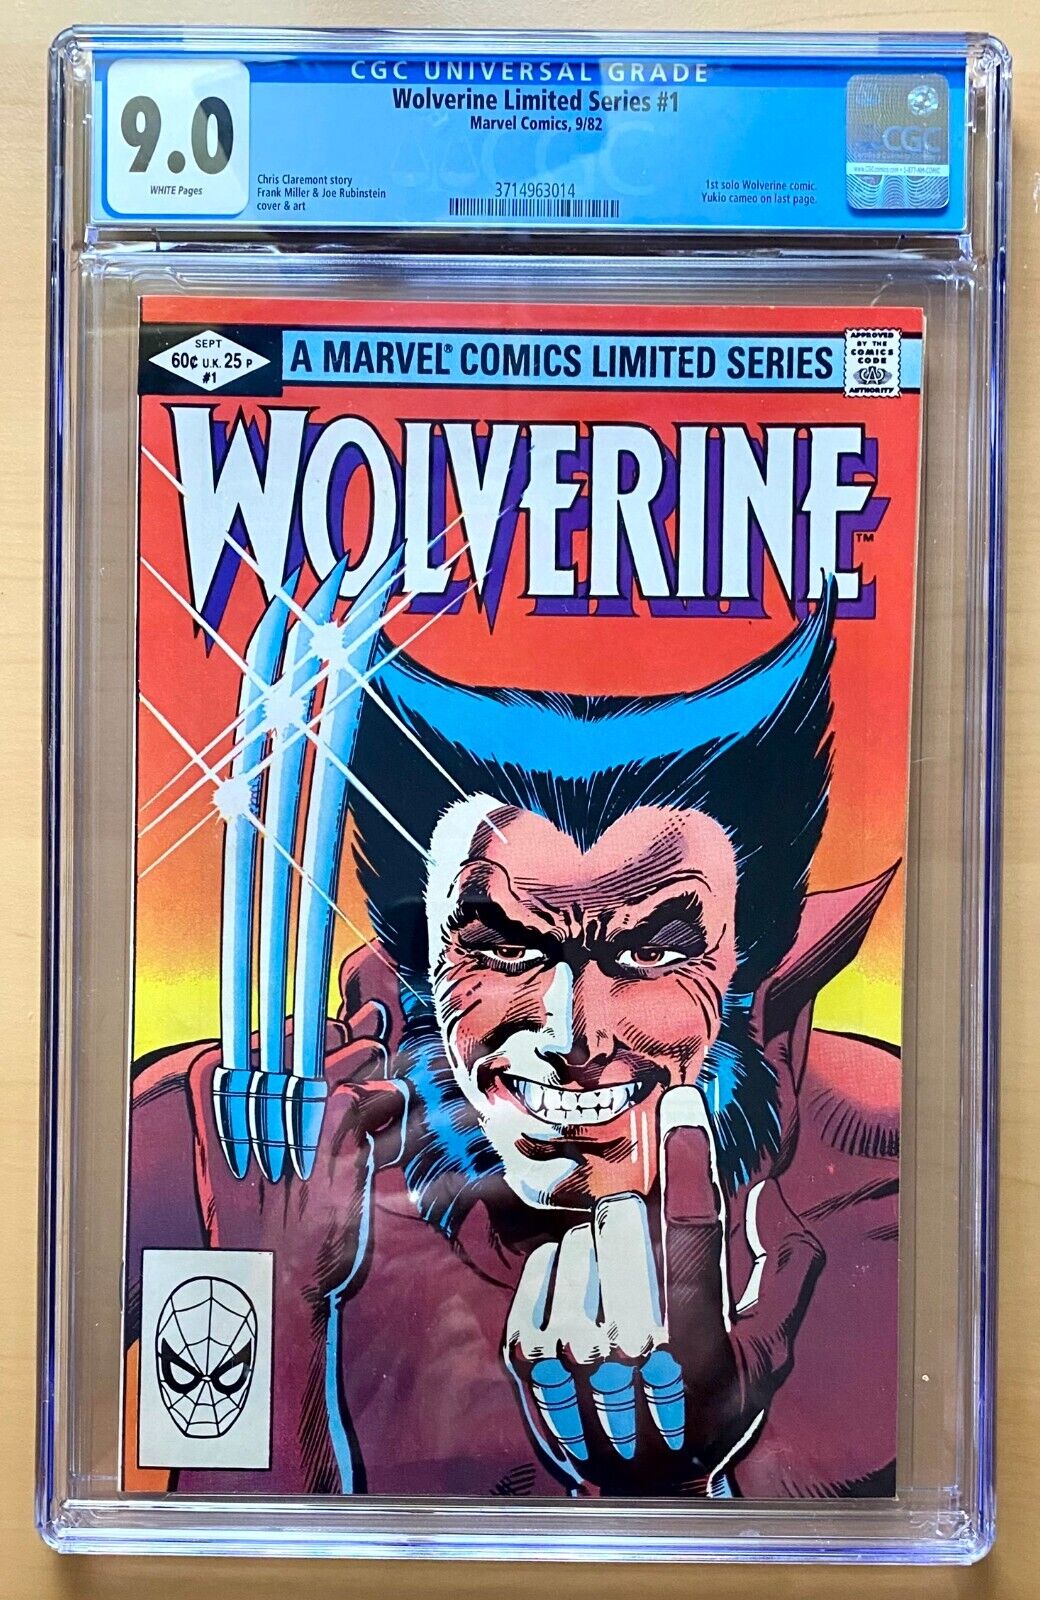 WOLVERINE #1 CGC 9.0 White Page 1st Solo Series Frank Miller Limited Series 1982